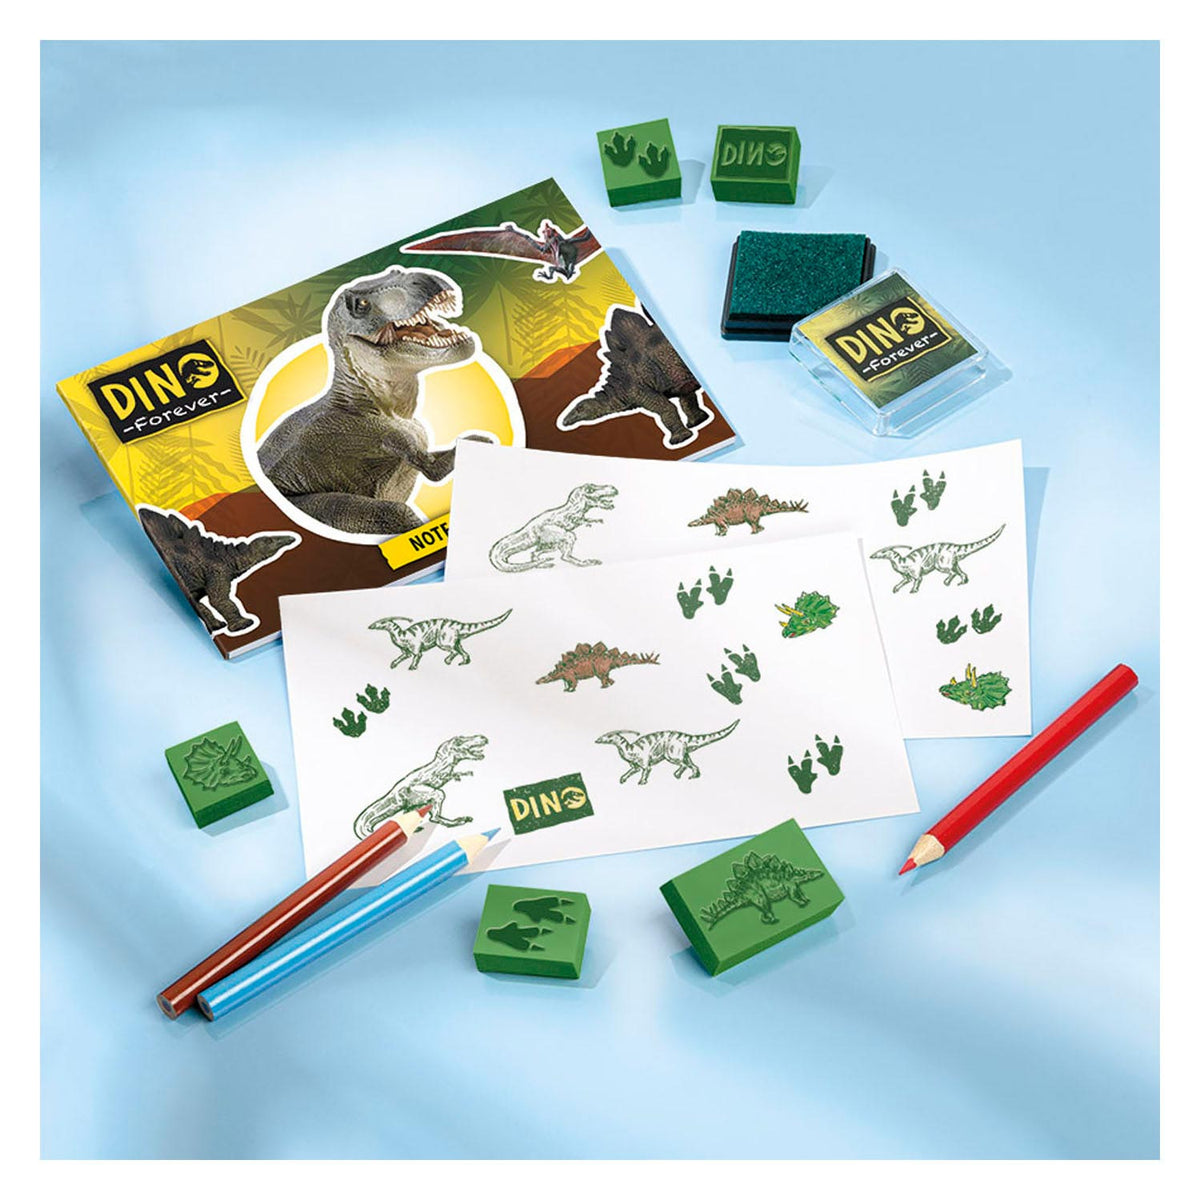 Totum Dino Forever - 2in1 Plaster and Color Creativity Set